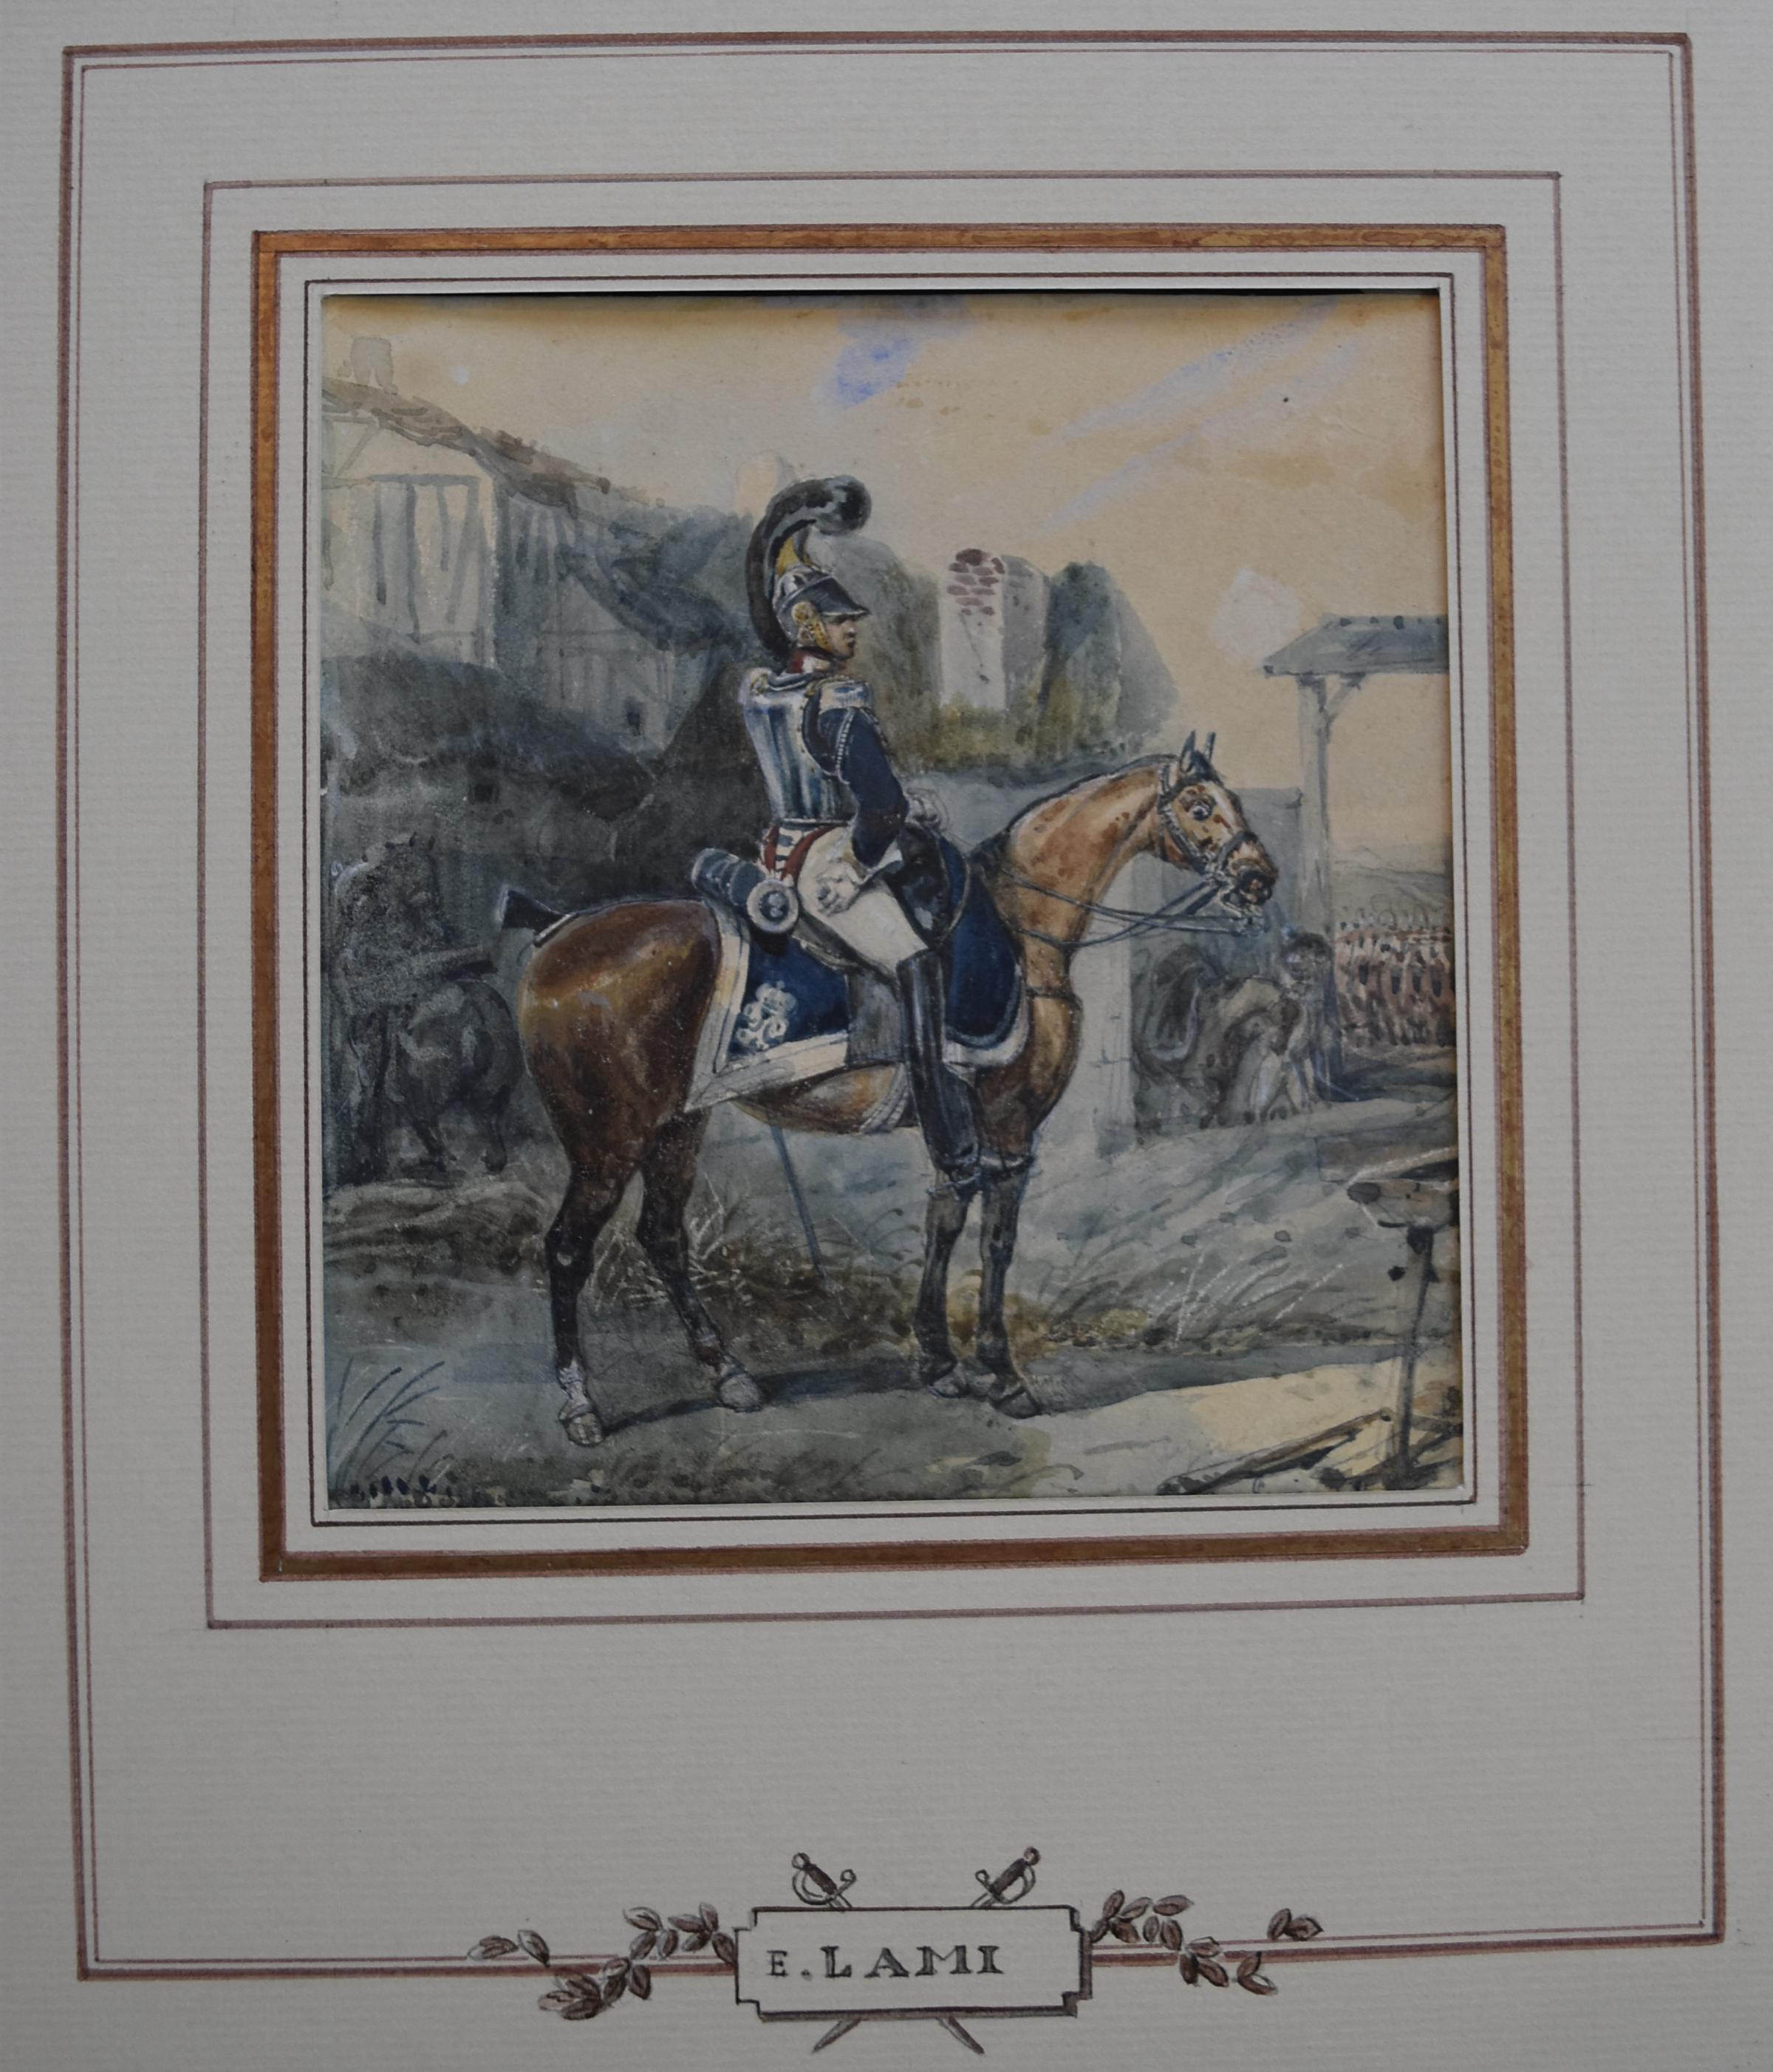 Attributed to Eugene Lami, a Hussar on his horse, watercolor 1